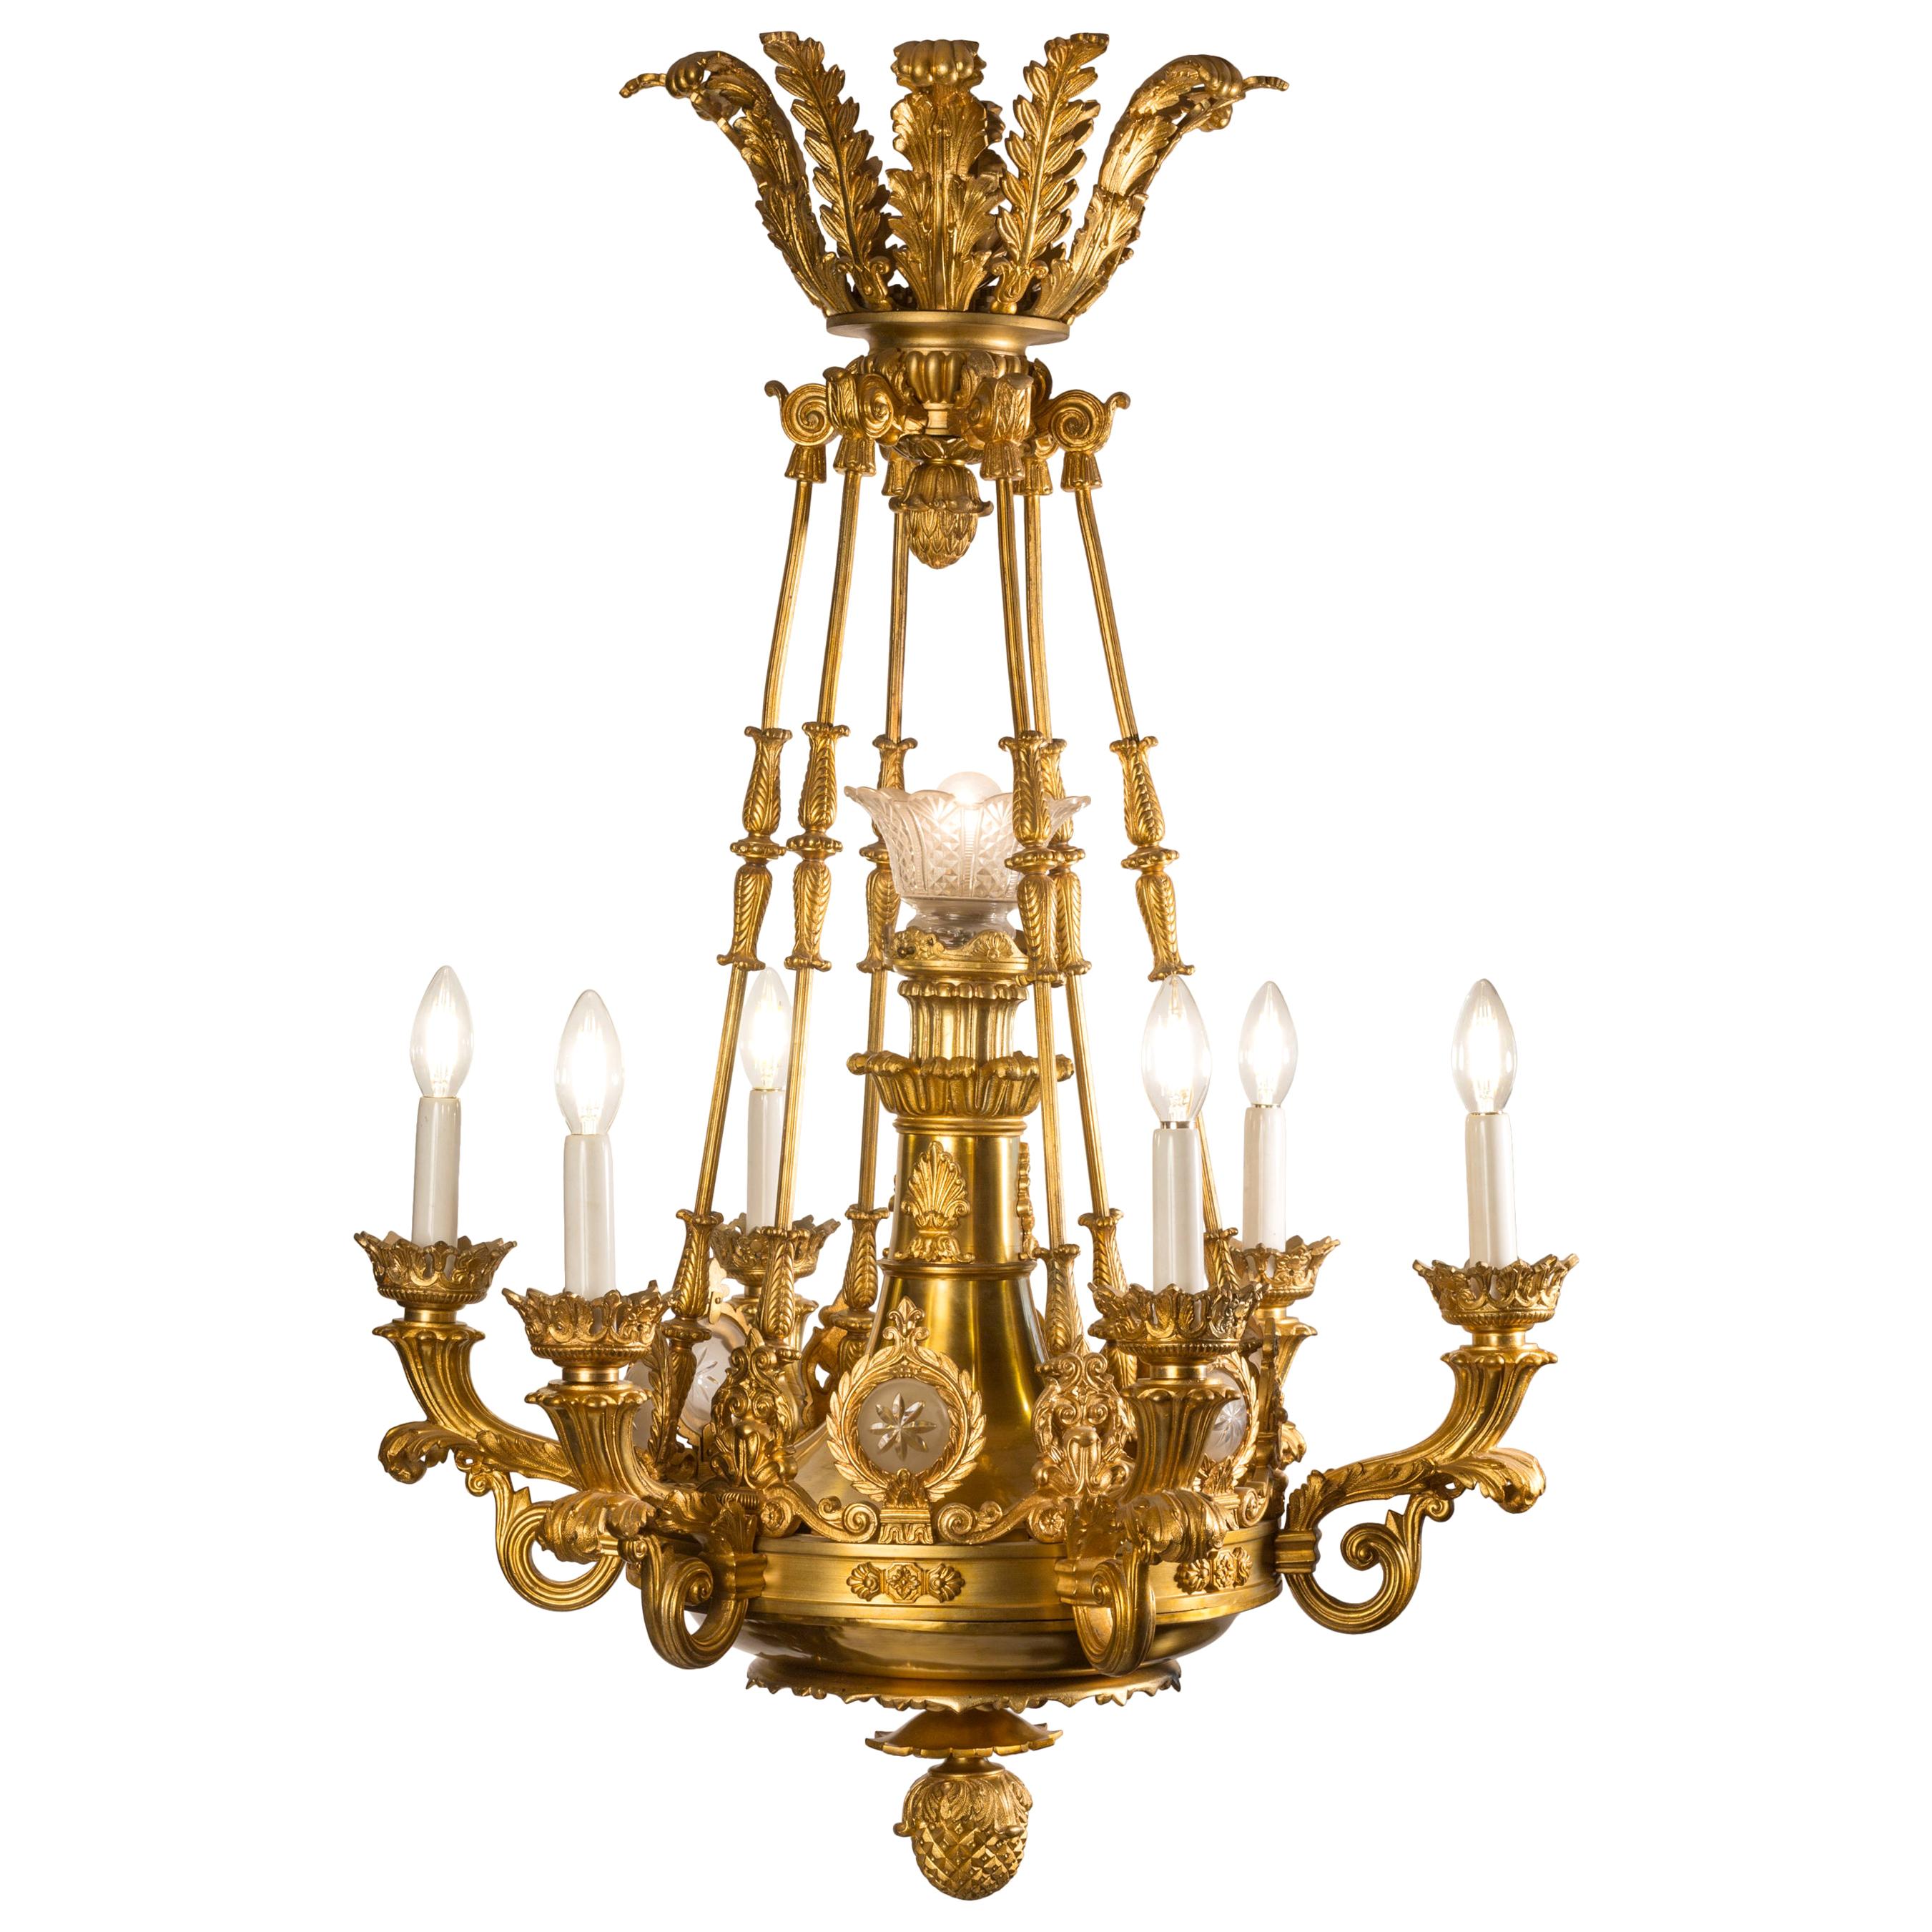 19th Century Antique French Empire Revival Style Ormolu Bronze Chandelier  For Sale